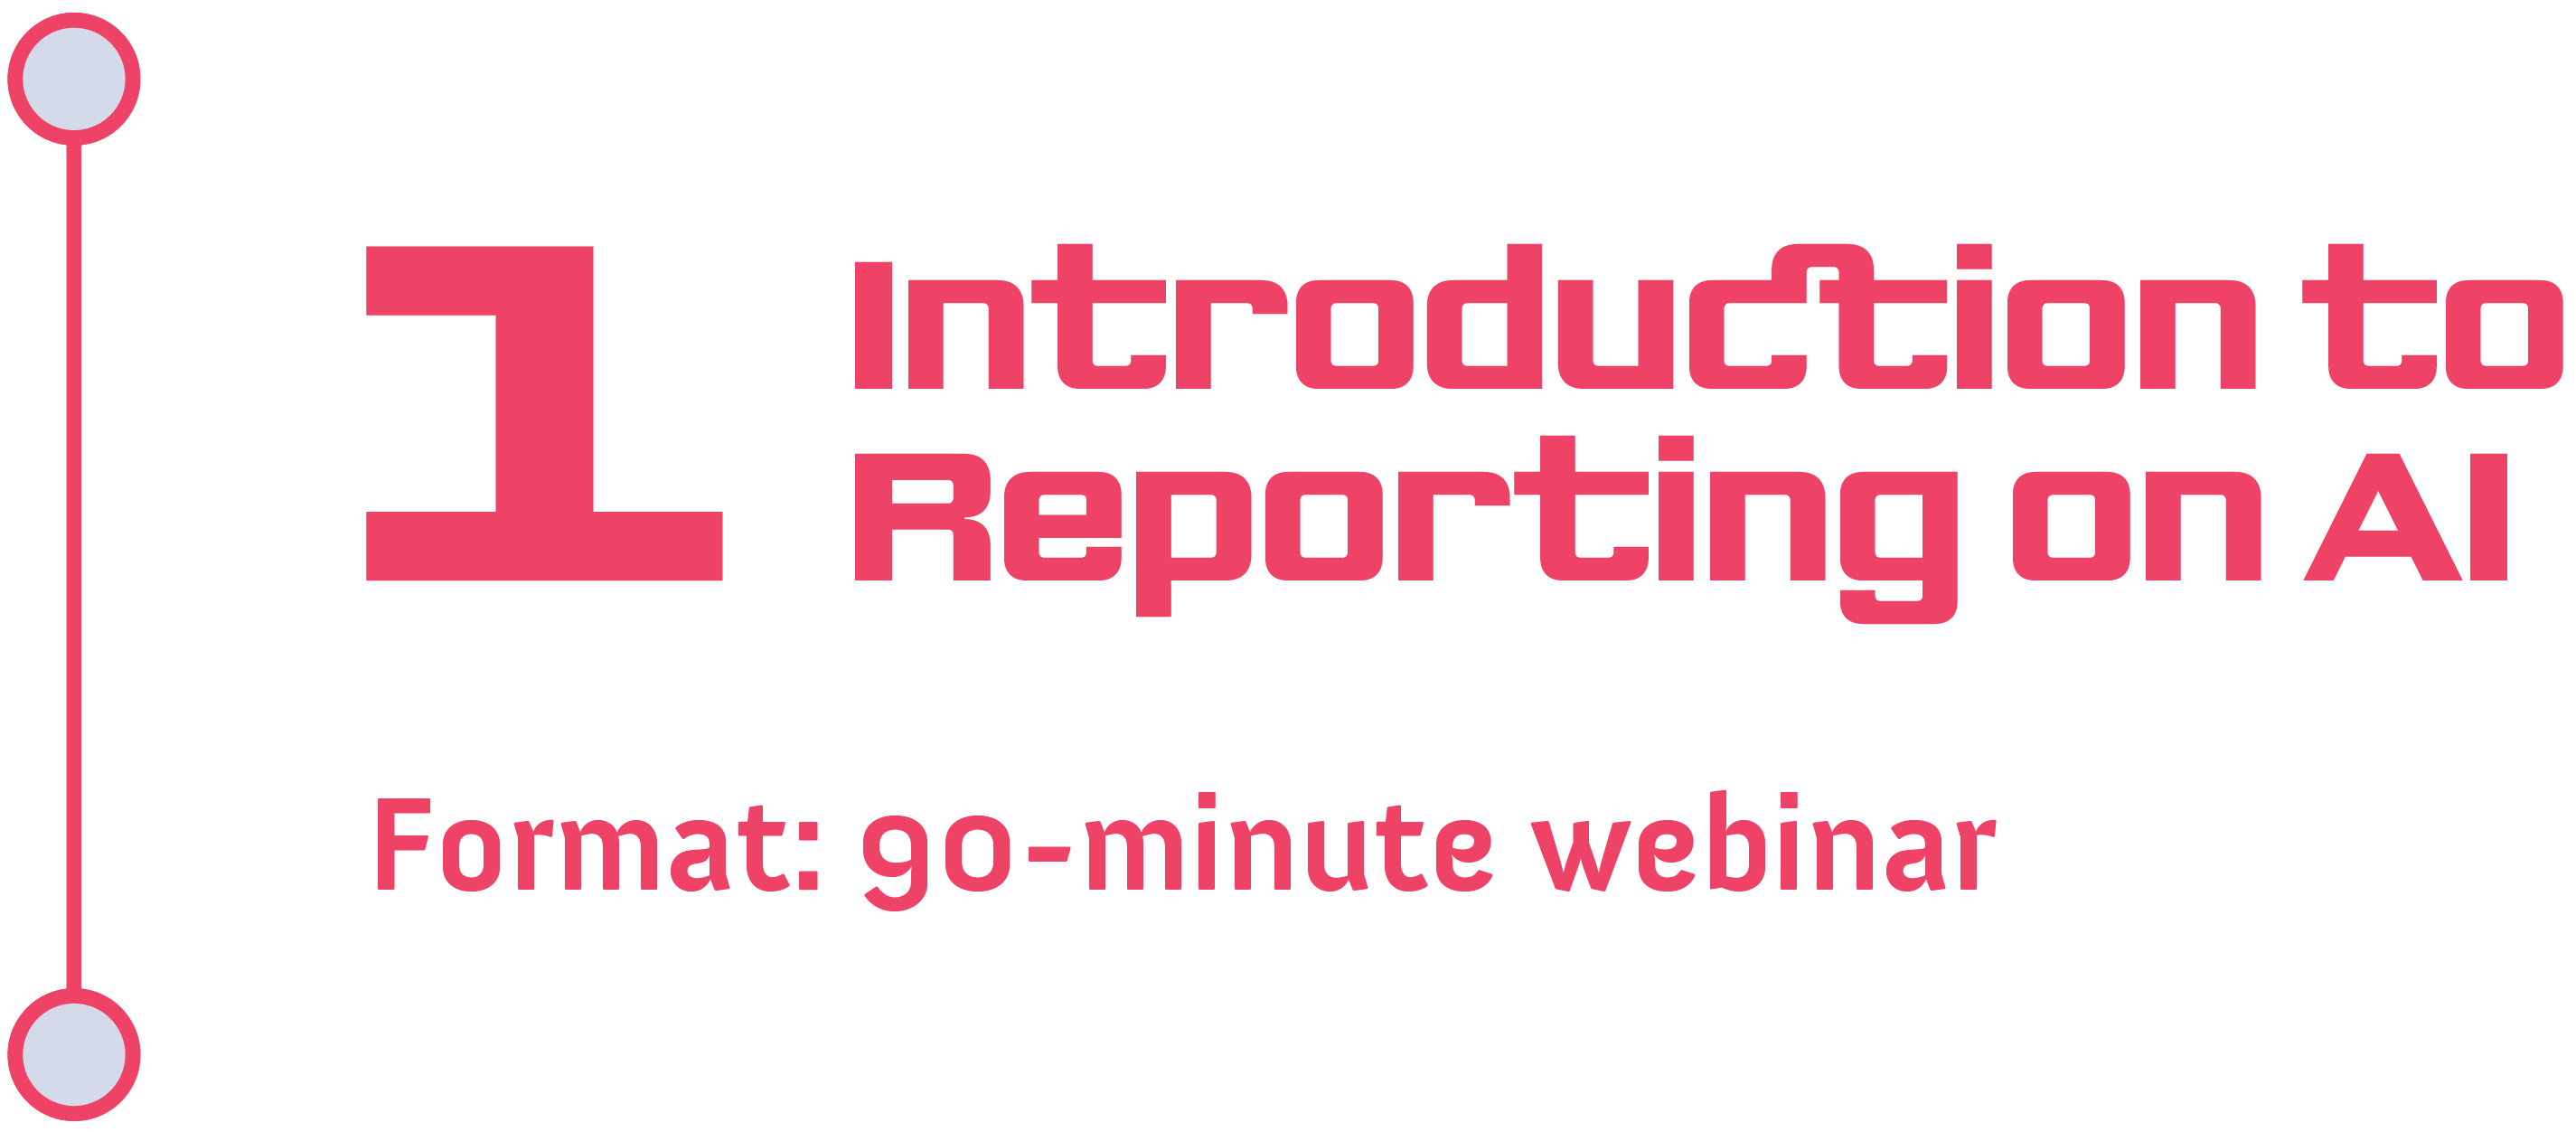 Track 1: Introduction to Reporting on AI<br />
Format: 90-minute webinar